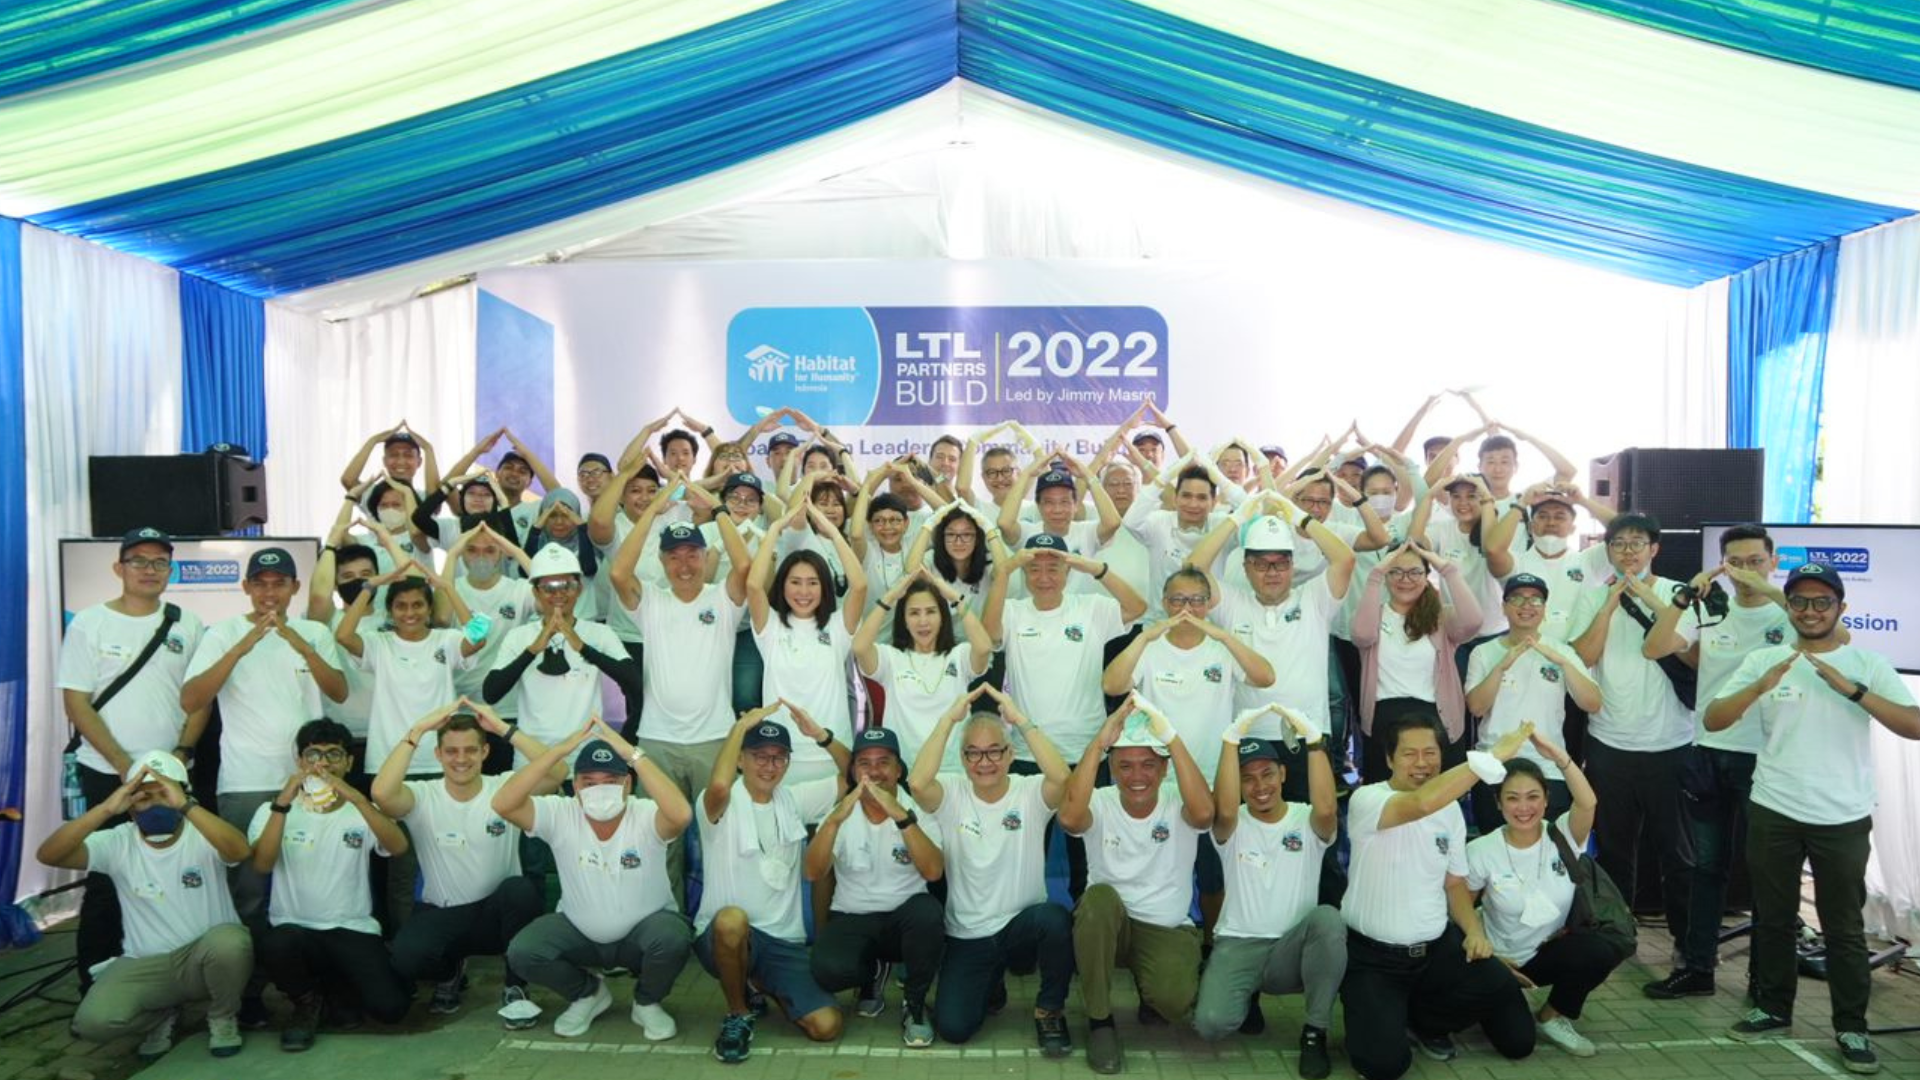 To Celebrate Its 71st Anniversary, Lautan Luas collaborates with Habitat Indonesia to Hold Lautan Luas and Partners Build